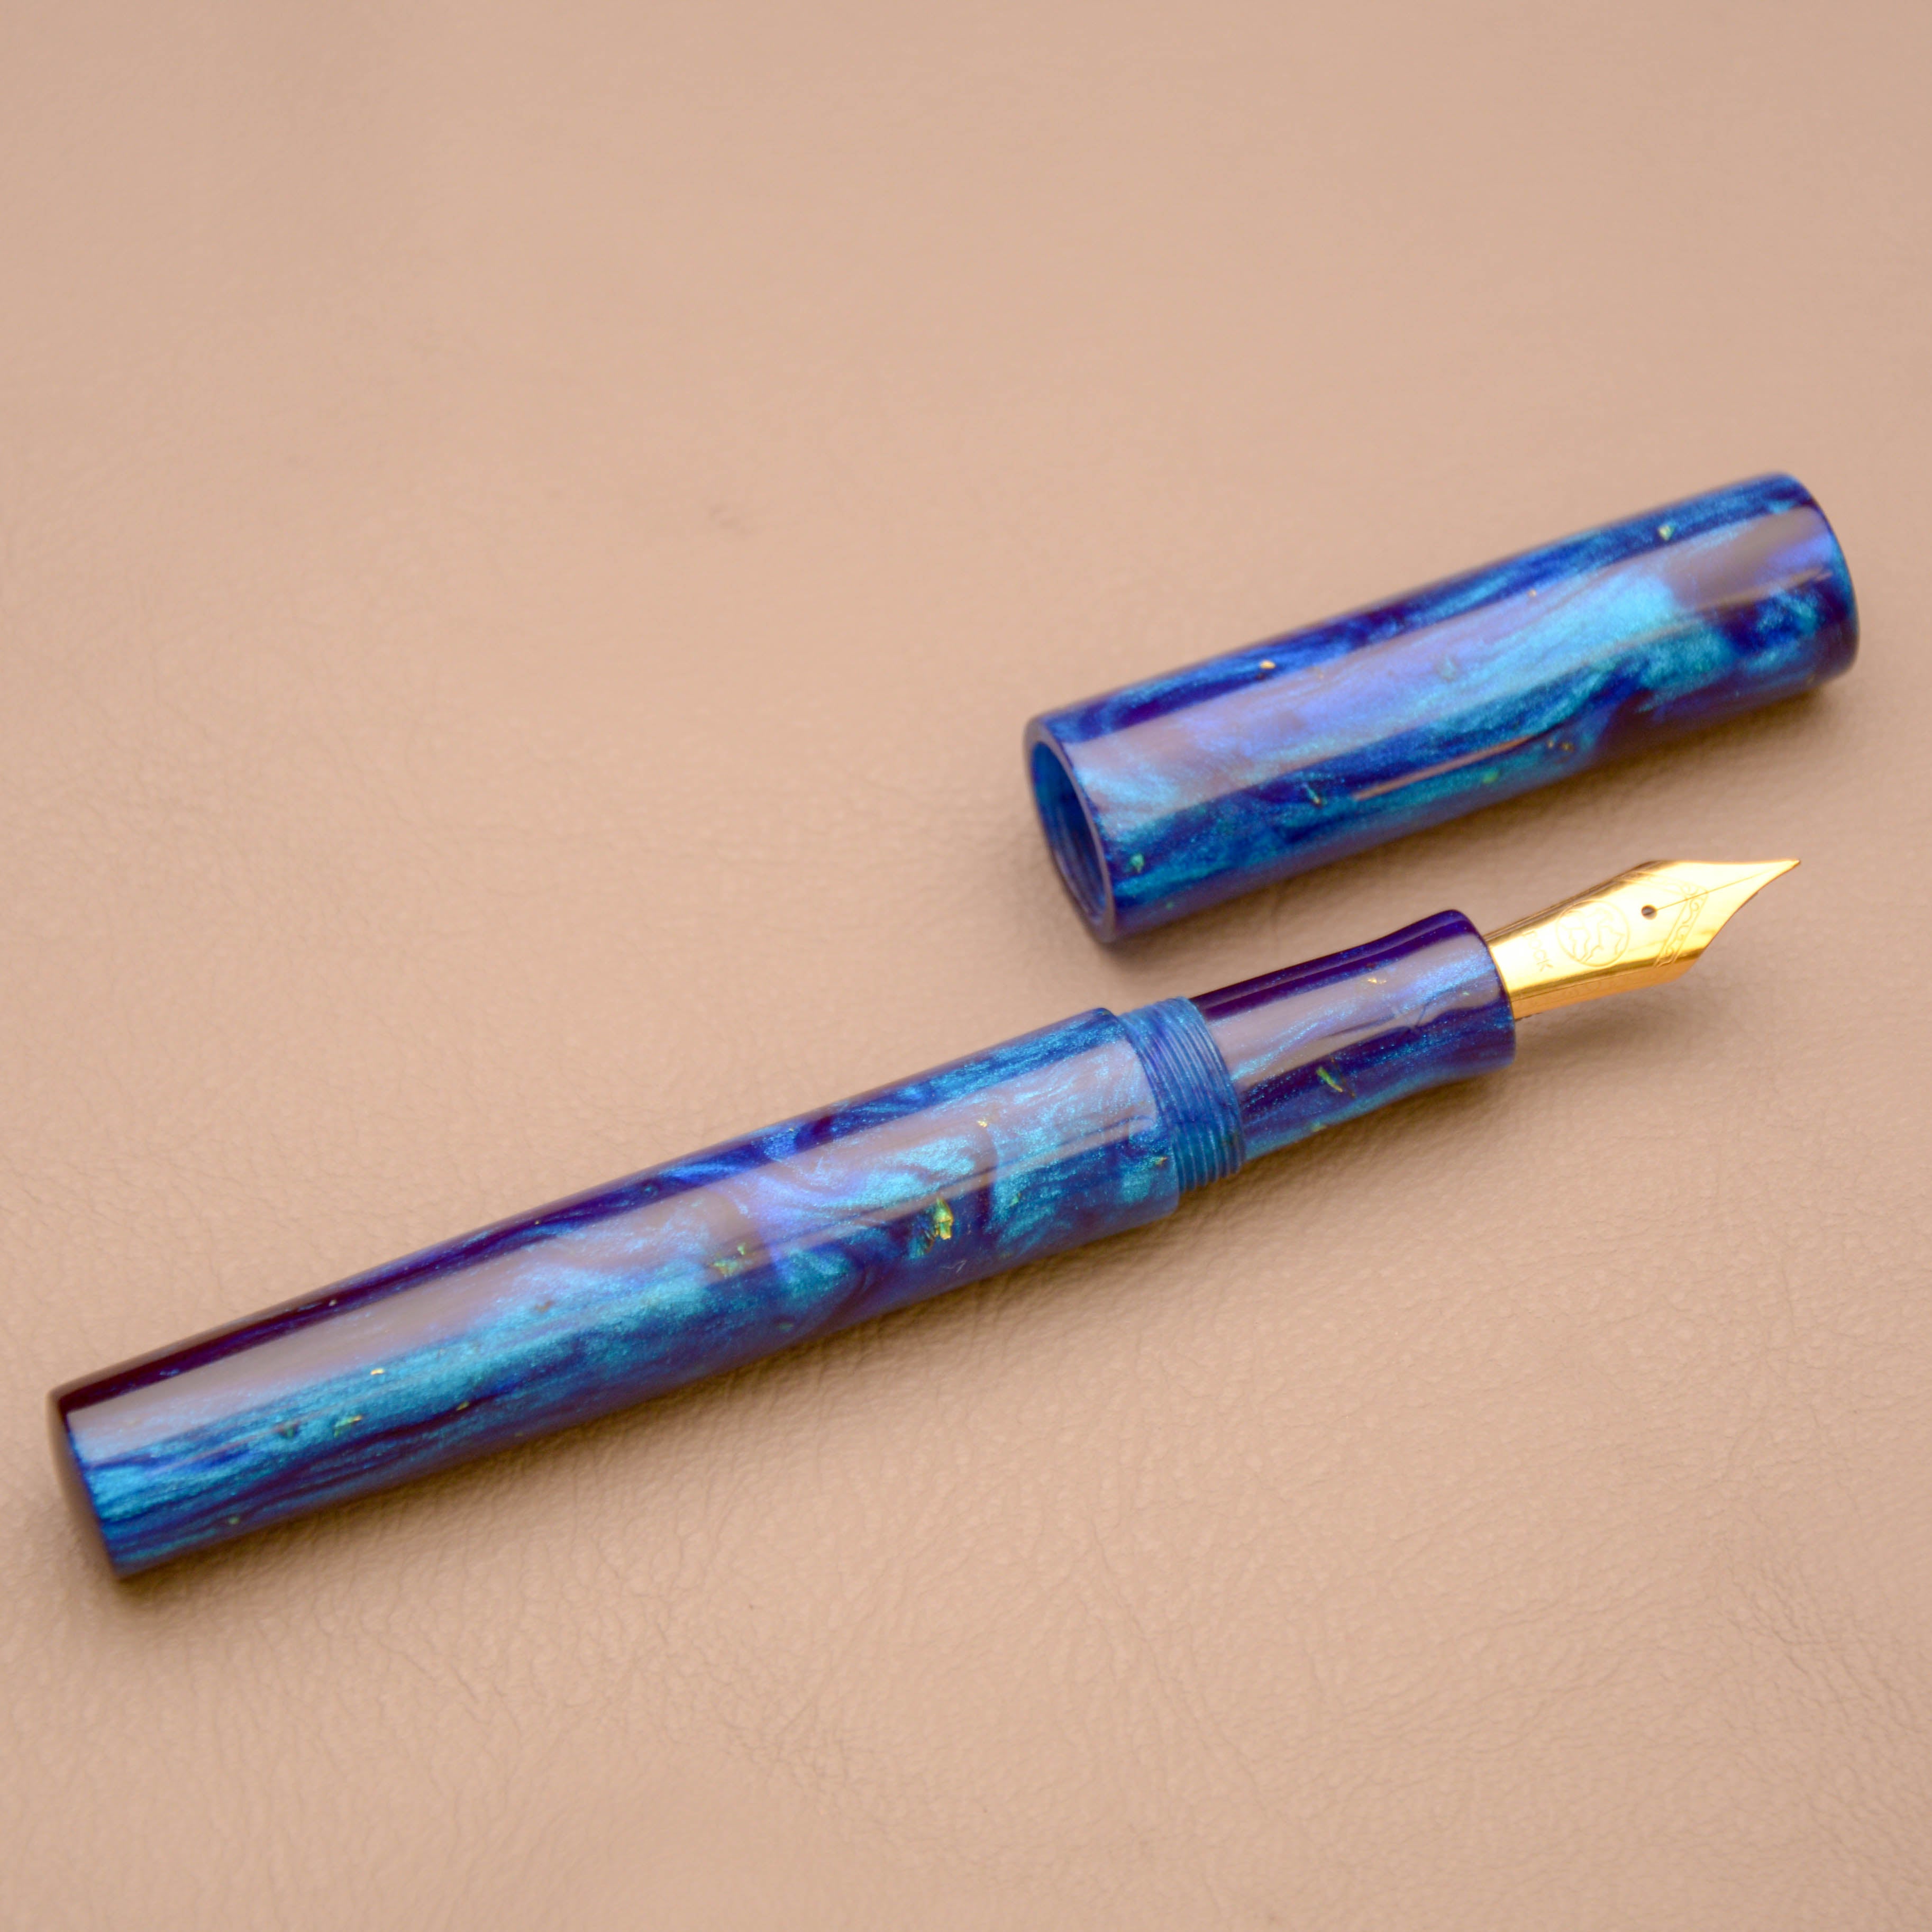 Fountain Pen - Bock #6 - 13 mm - In house cast with multiple blues and real gold flakes